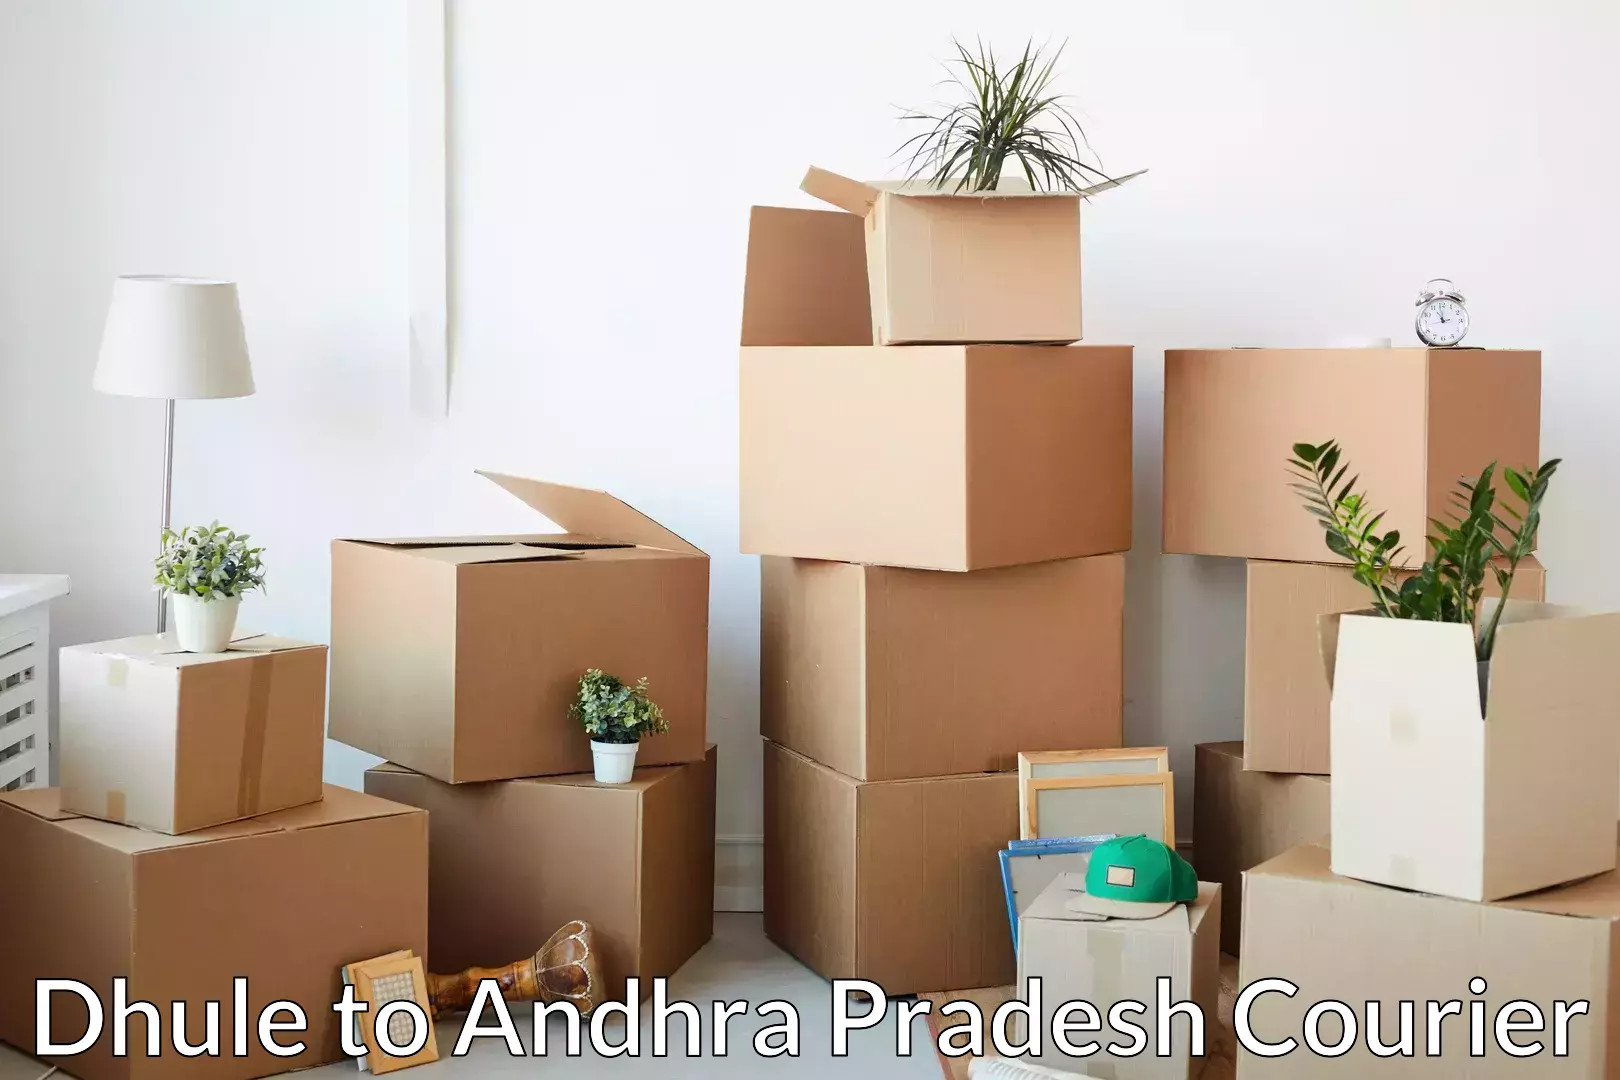 Trusted moving company Dhule to Mangalagiri